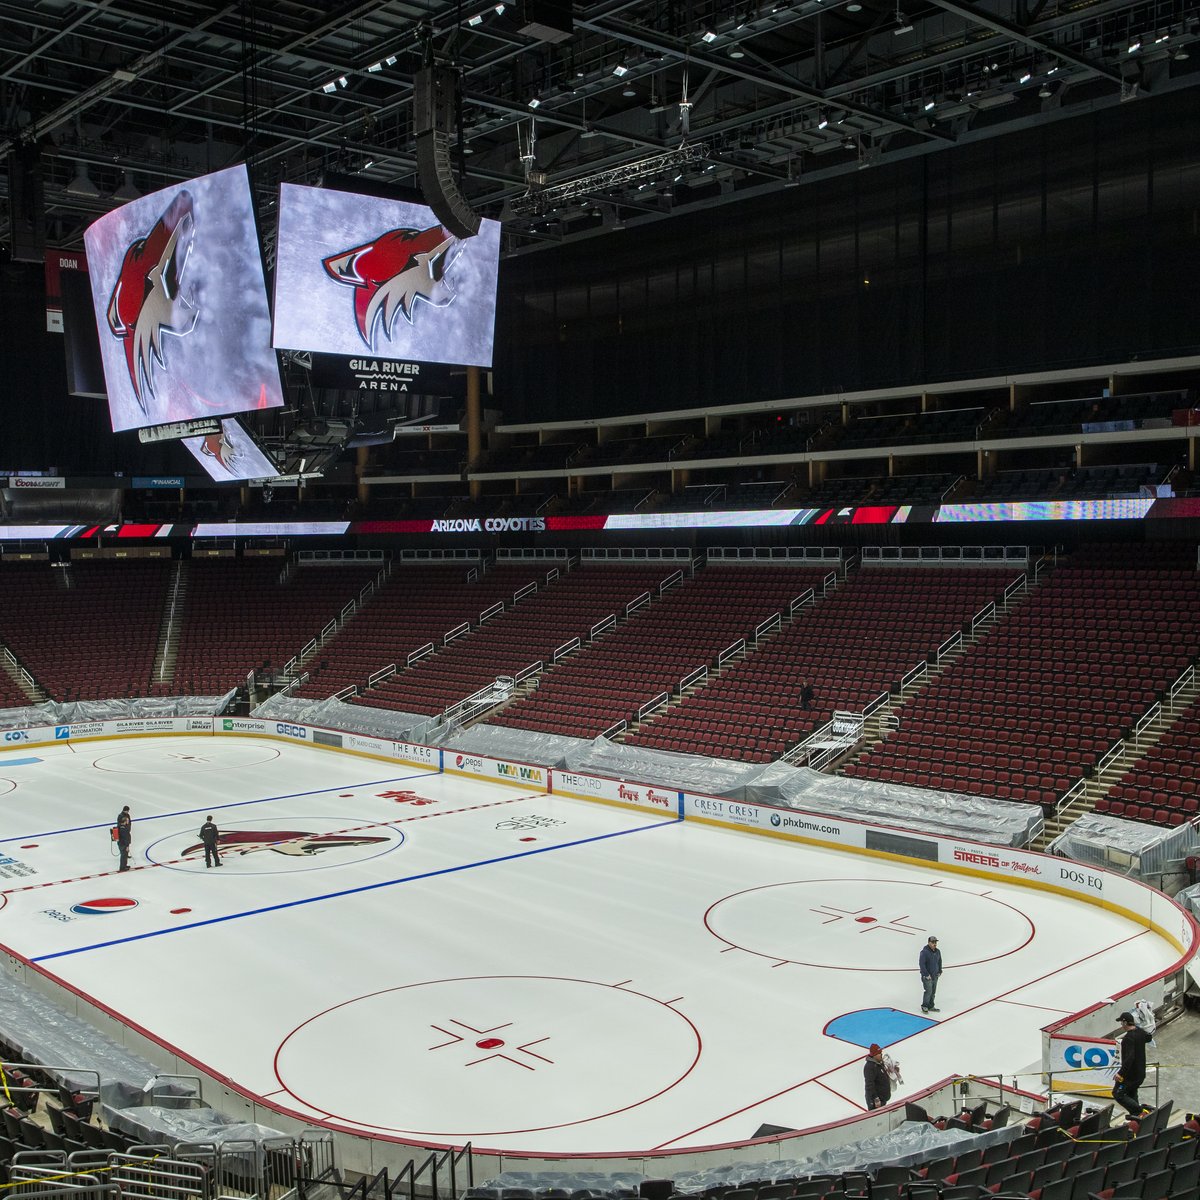 Arizona Coyotes expect to sell out every home game at ASU, say  season-ticket revenue up 50% over Glendale arena - ESPN